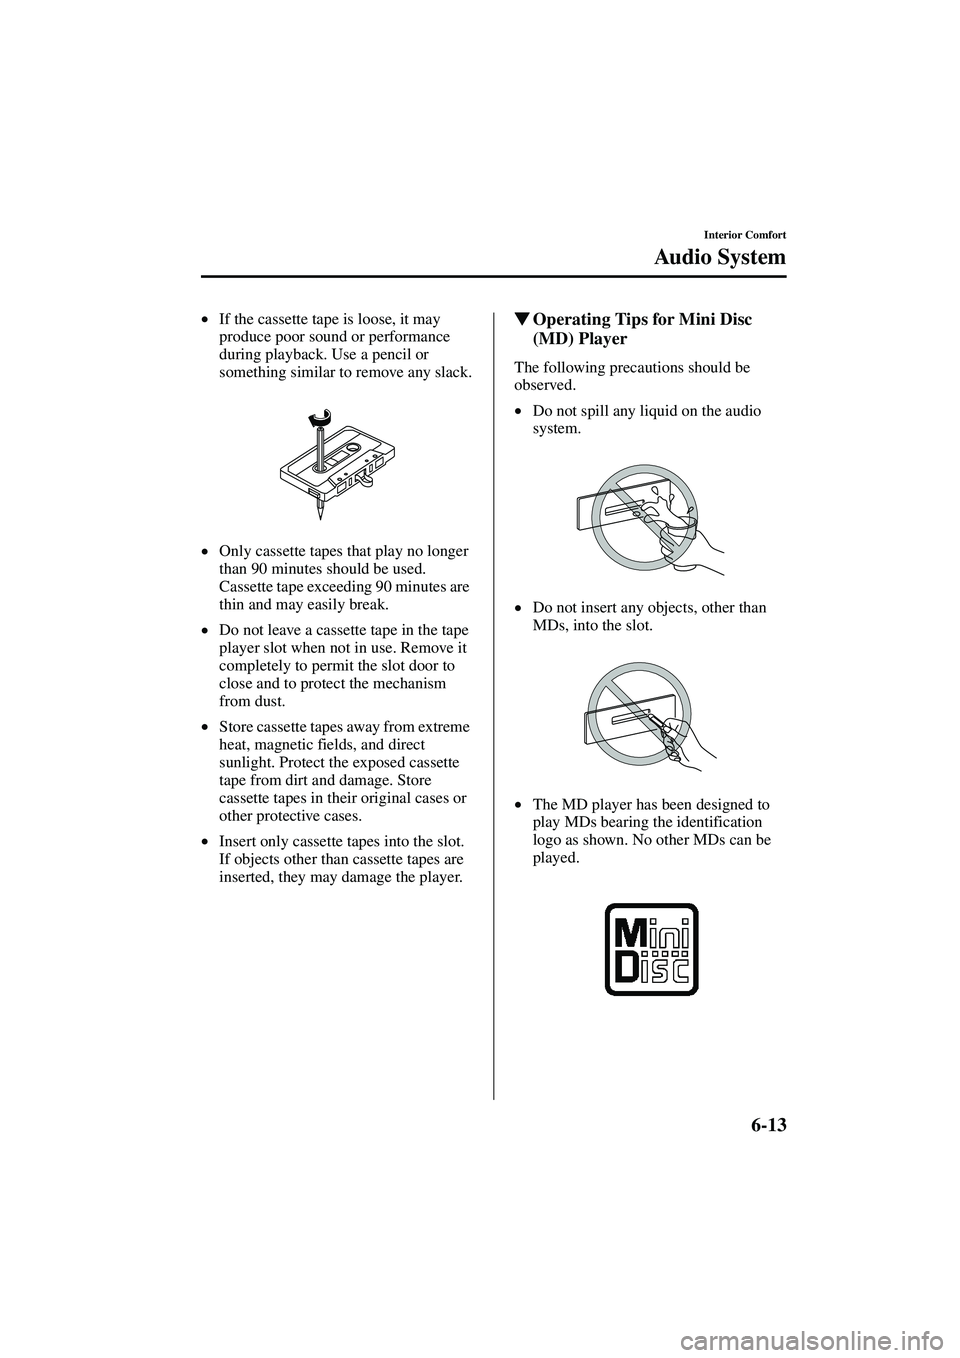 MAZDA MODEL MX-5 MIATA 2003  Owners Manual 6-13
Interior Comfort
Au di o S ys t em
Form No. 8R09-EA-02G
•If the cassette tape is loose, it may 
produce poor sound or performance 
during playback. Use a pencil or 
something similar to remove 